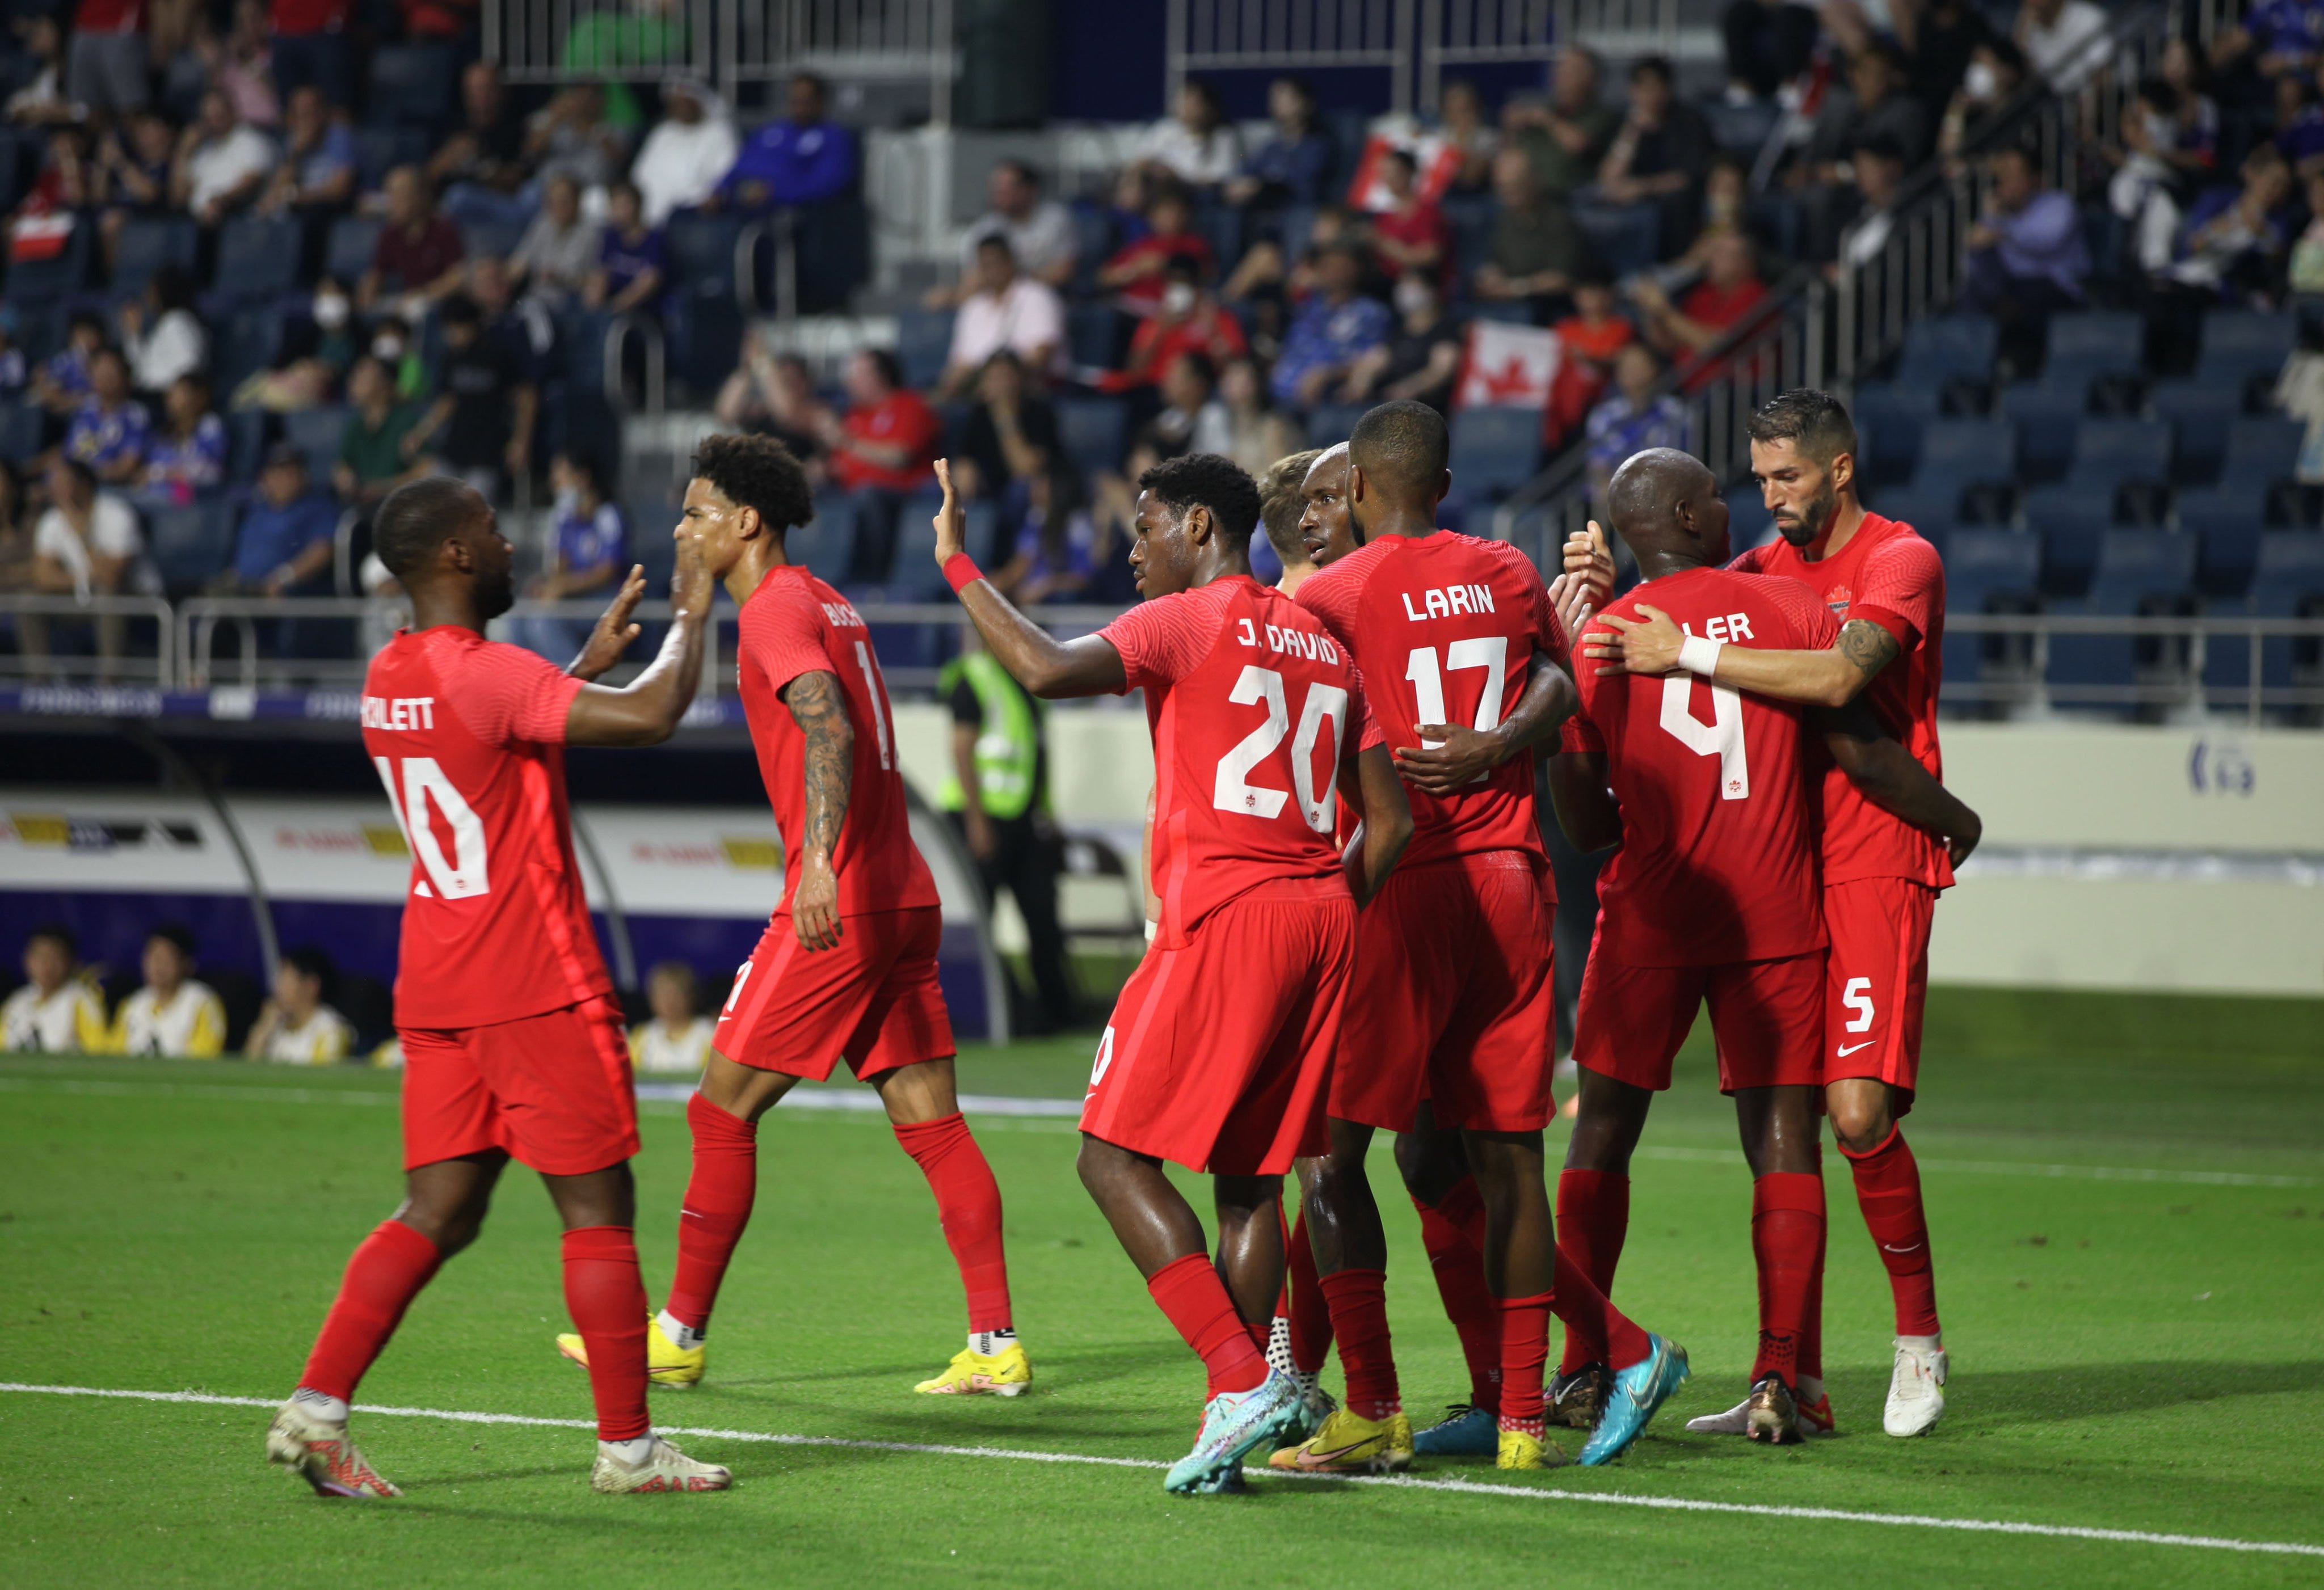 Concacaf World Cup megapreview (Experts version) Part 2 Canada, Costa Rica